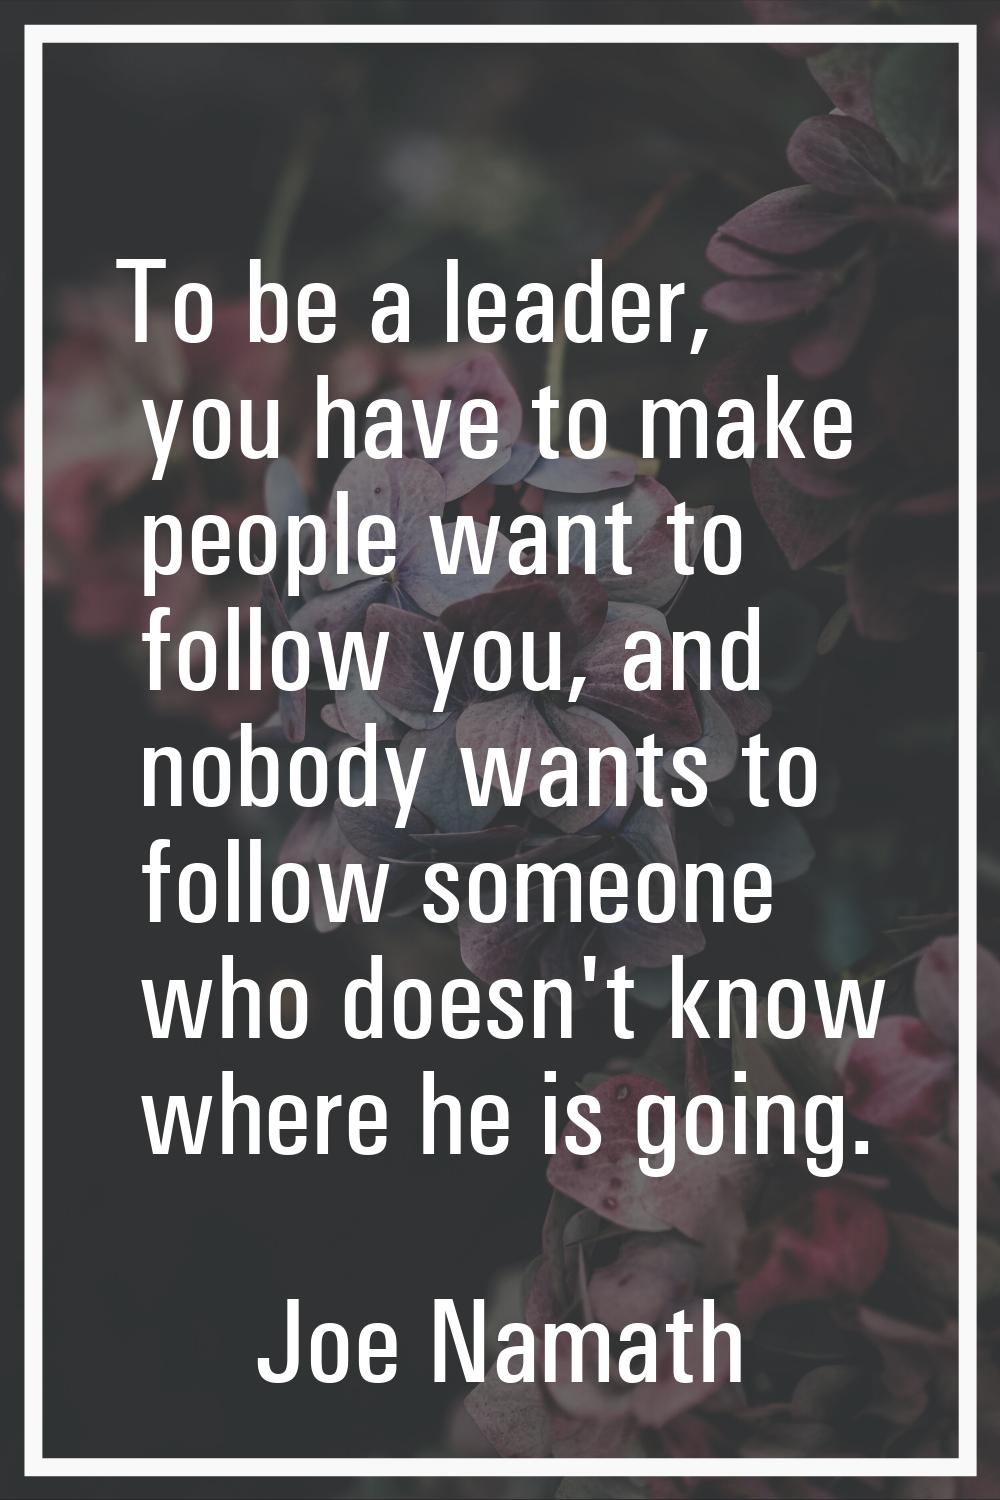 To be a leader, you have to make people want to follow you, and nobody wants to follow someone who 